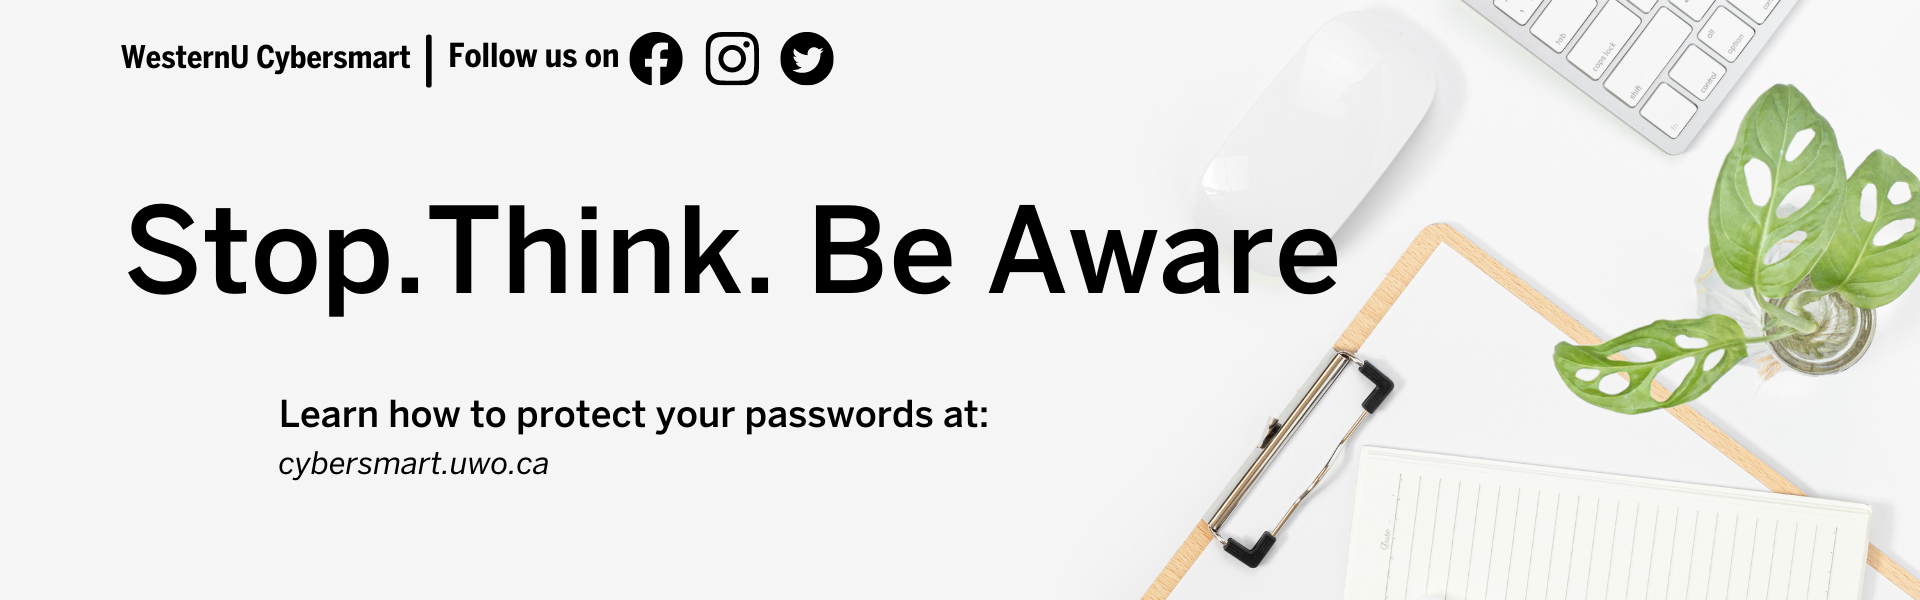 Learn how to protect your password at cybersmart.uwo.ca